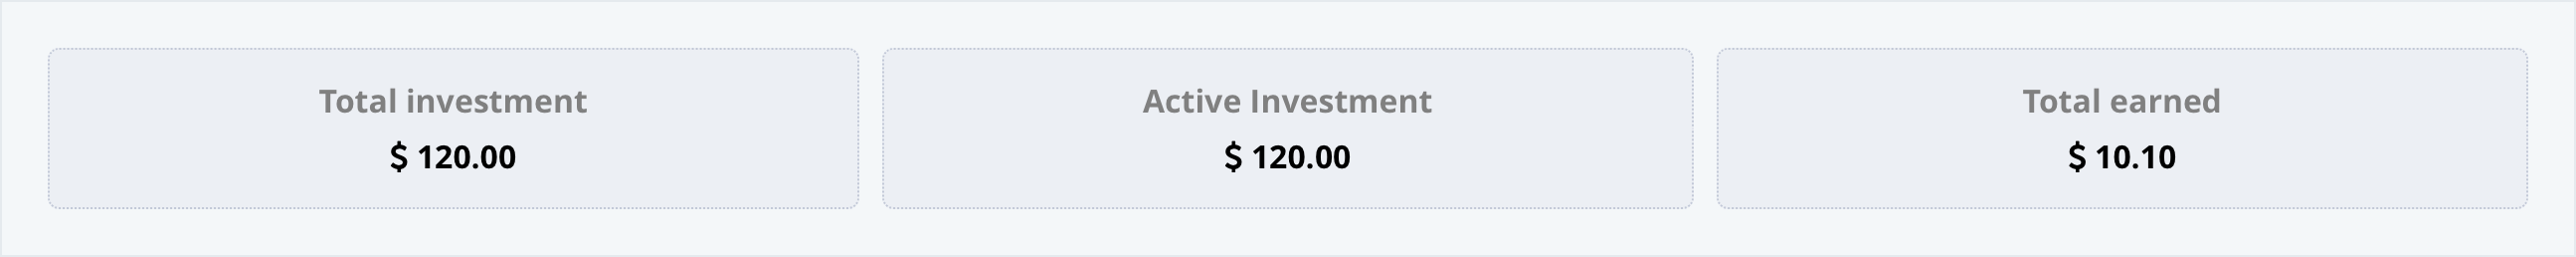 total_investment_day_6.png